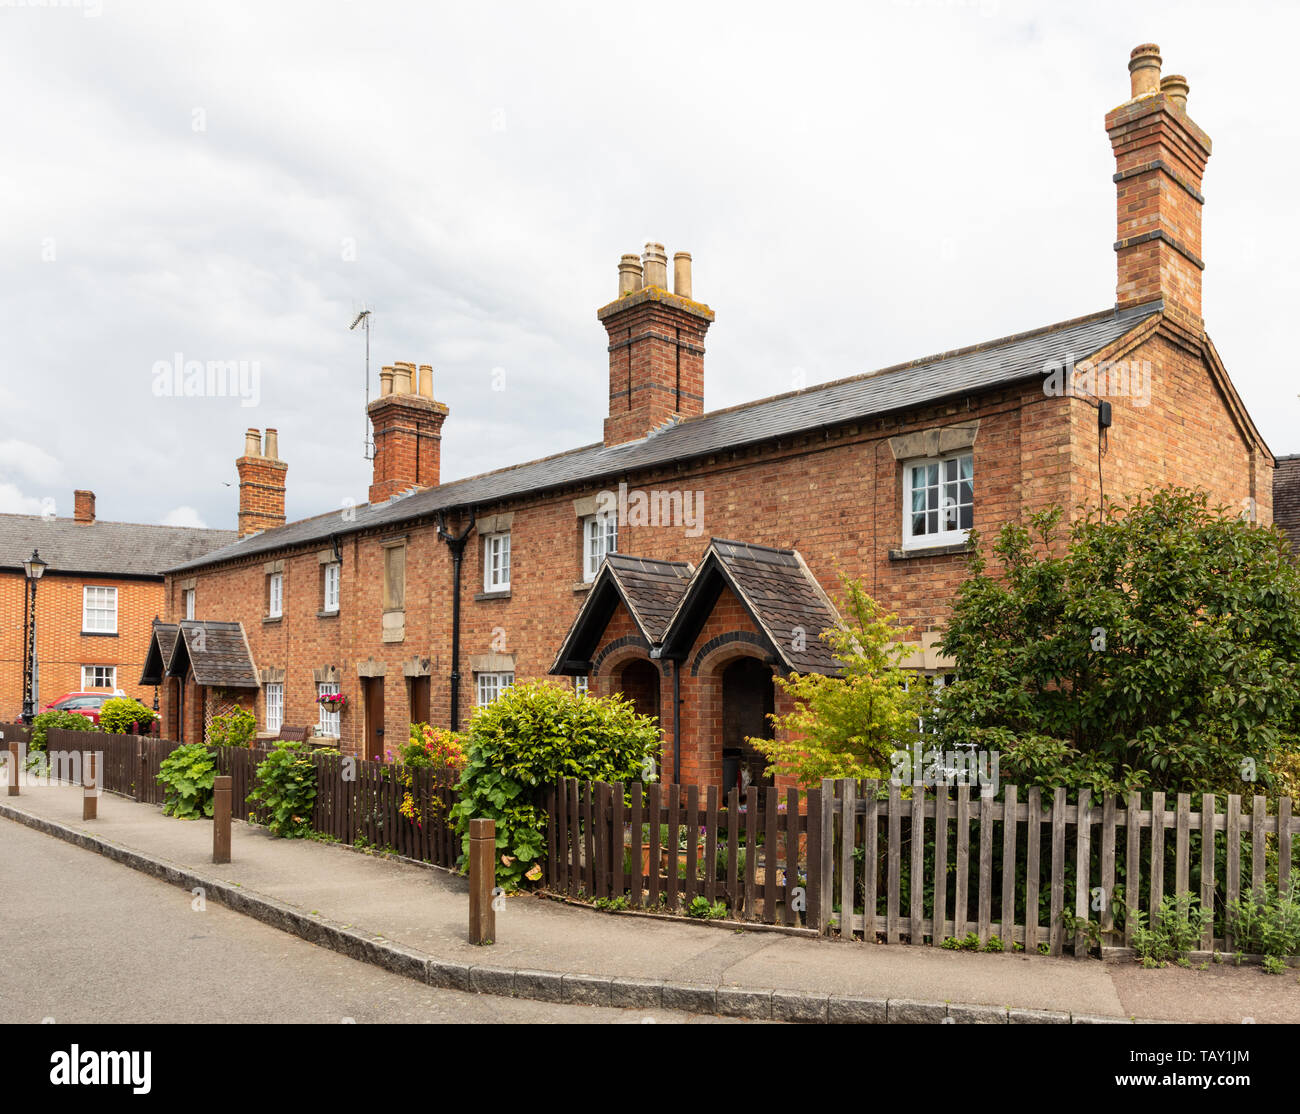 A row of six, Grade II listed, brick-built almshouses in The Square, Dunchurch, near Rugby, Warwickshire, UK. Stock Photo